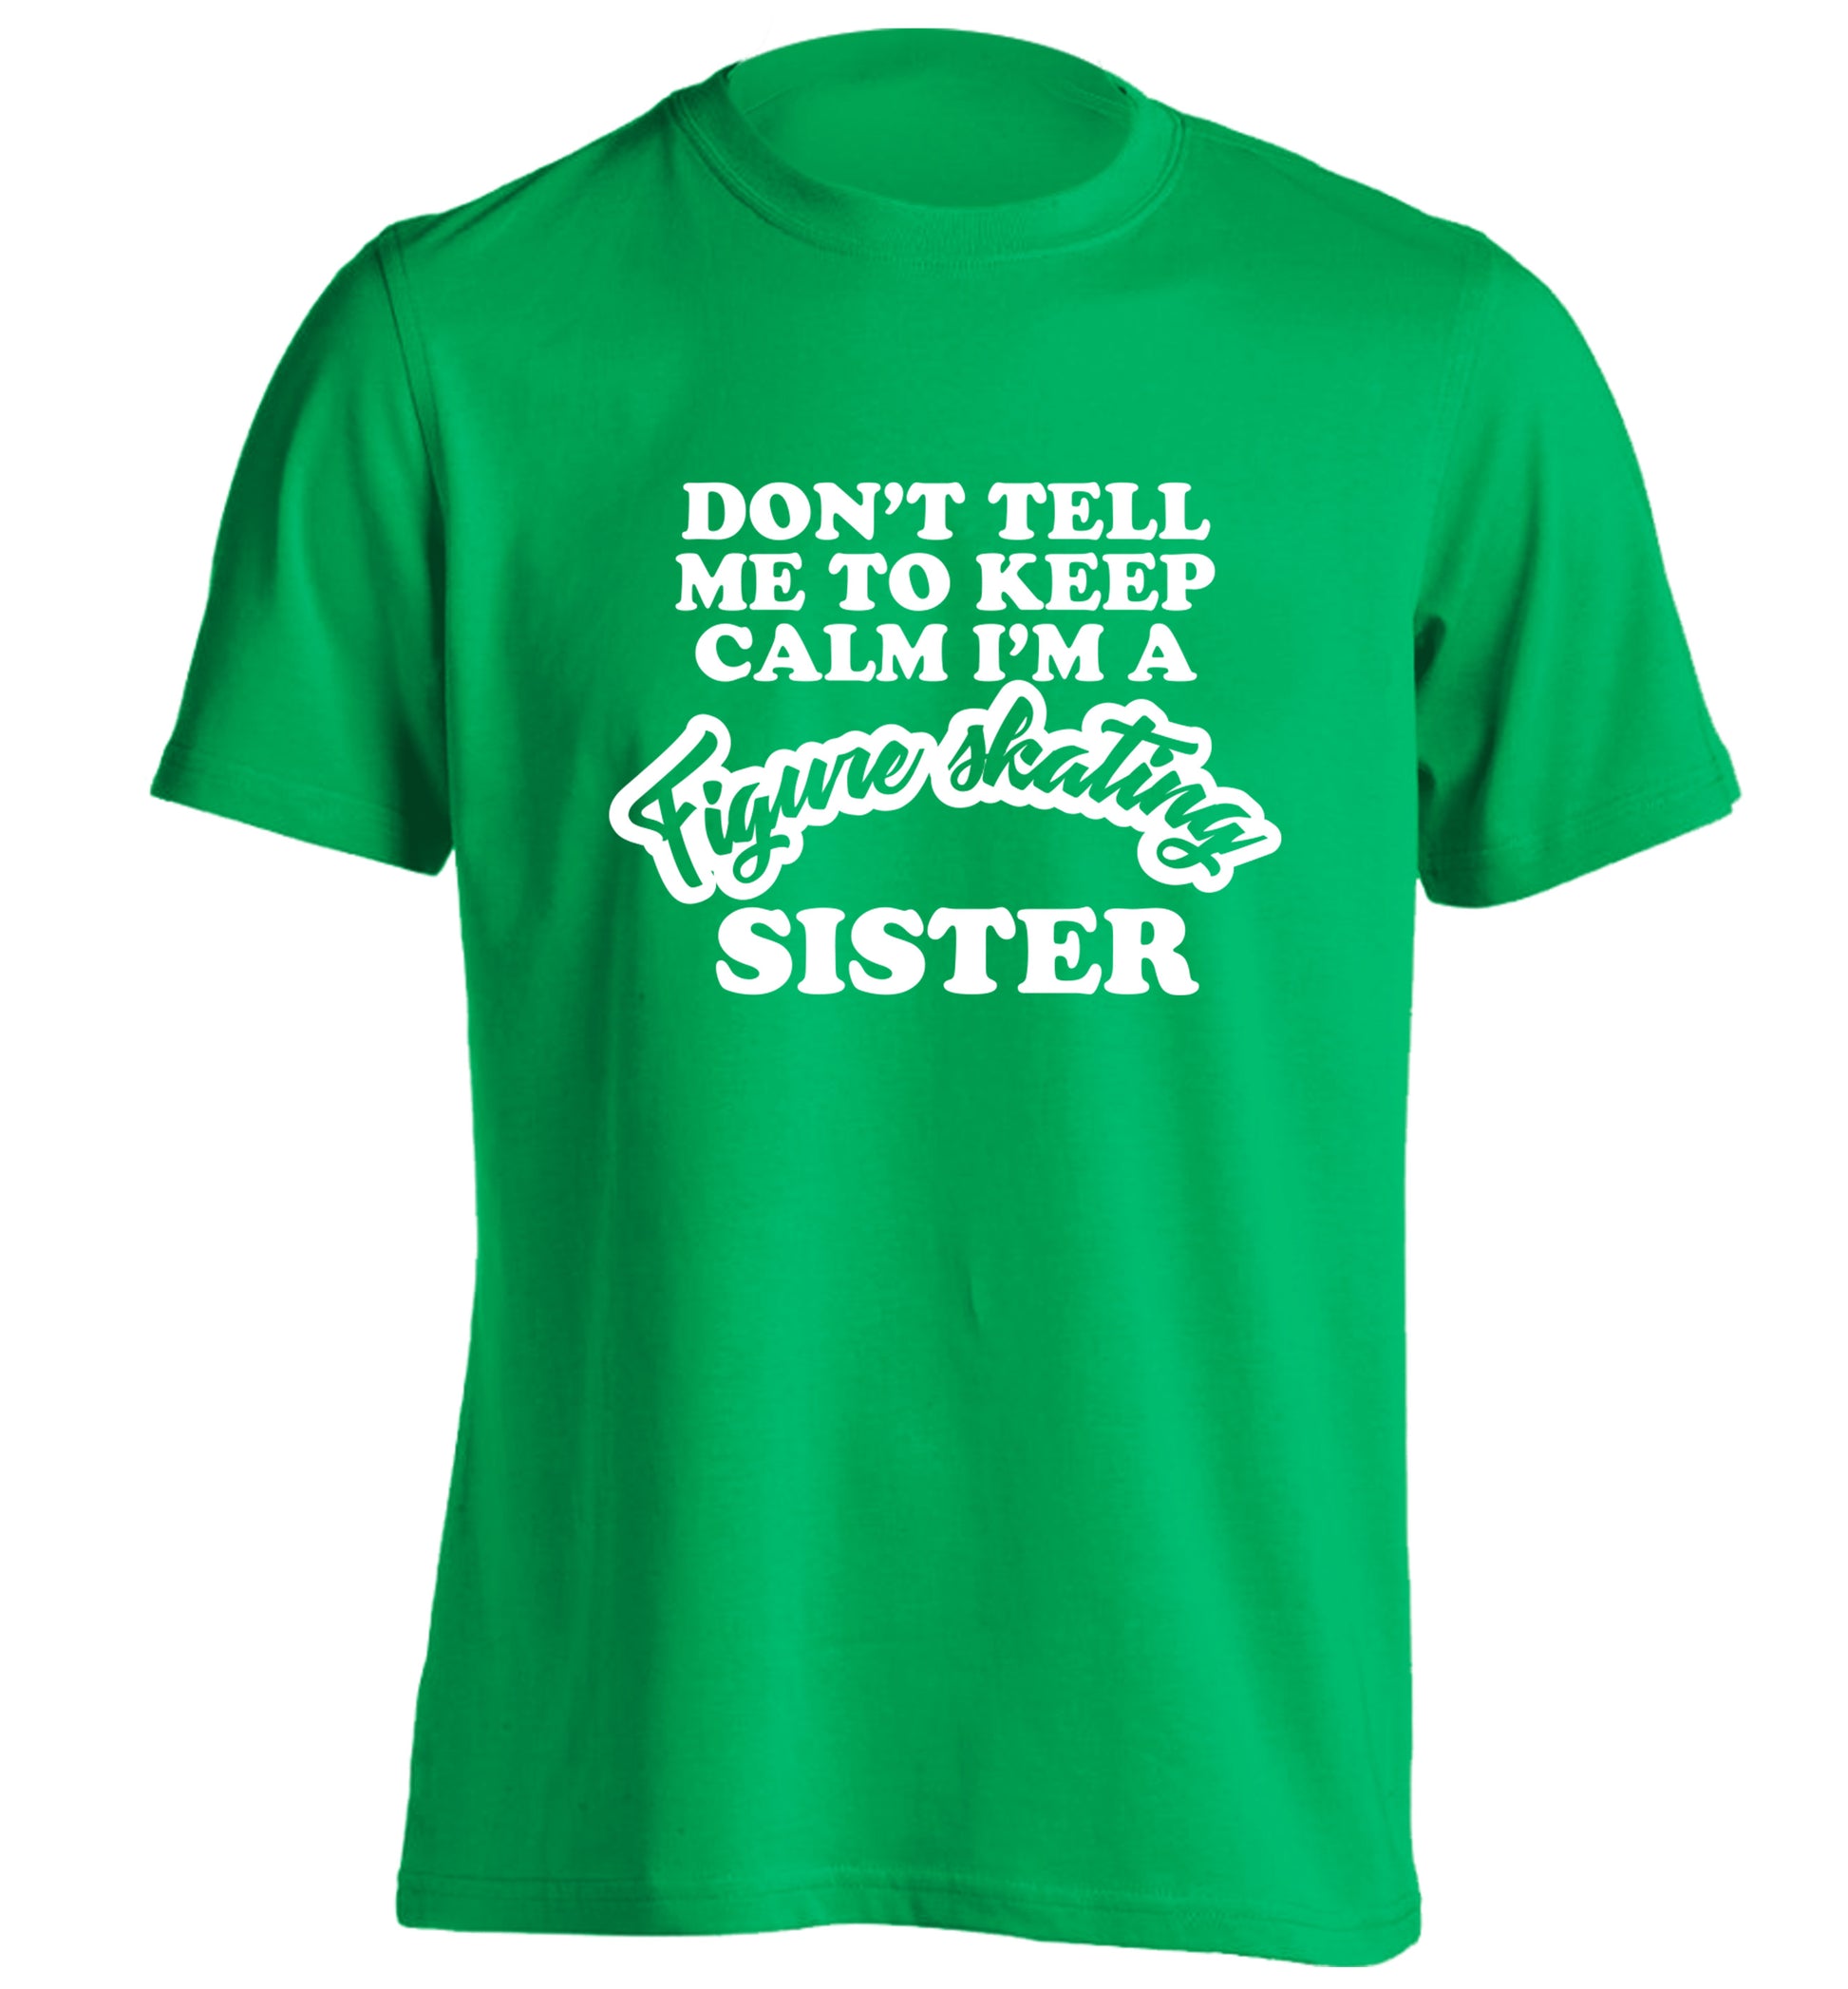 Don't tell me to keep calm I'm a figure skating sister adults unisexgreen Tshirt 2XL